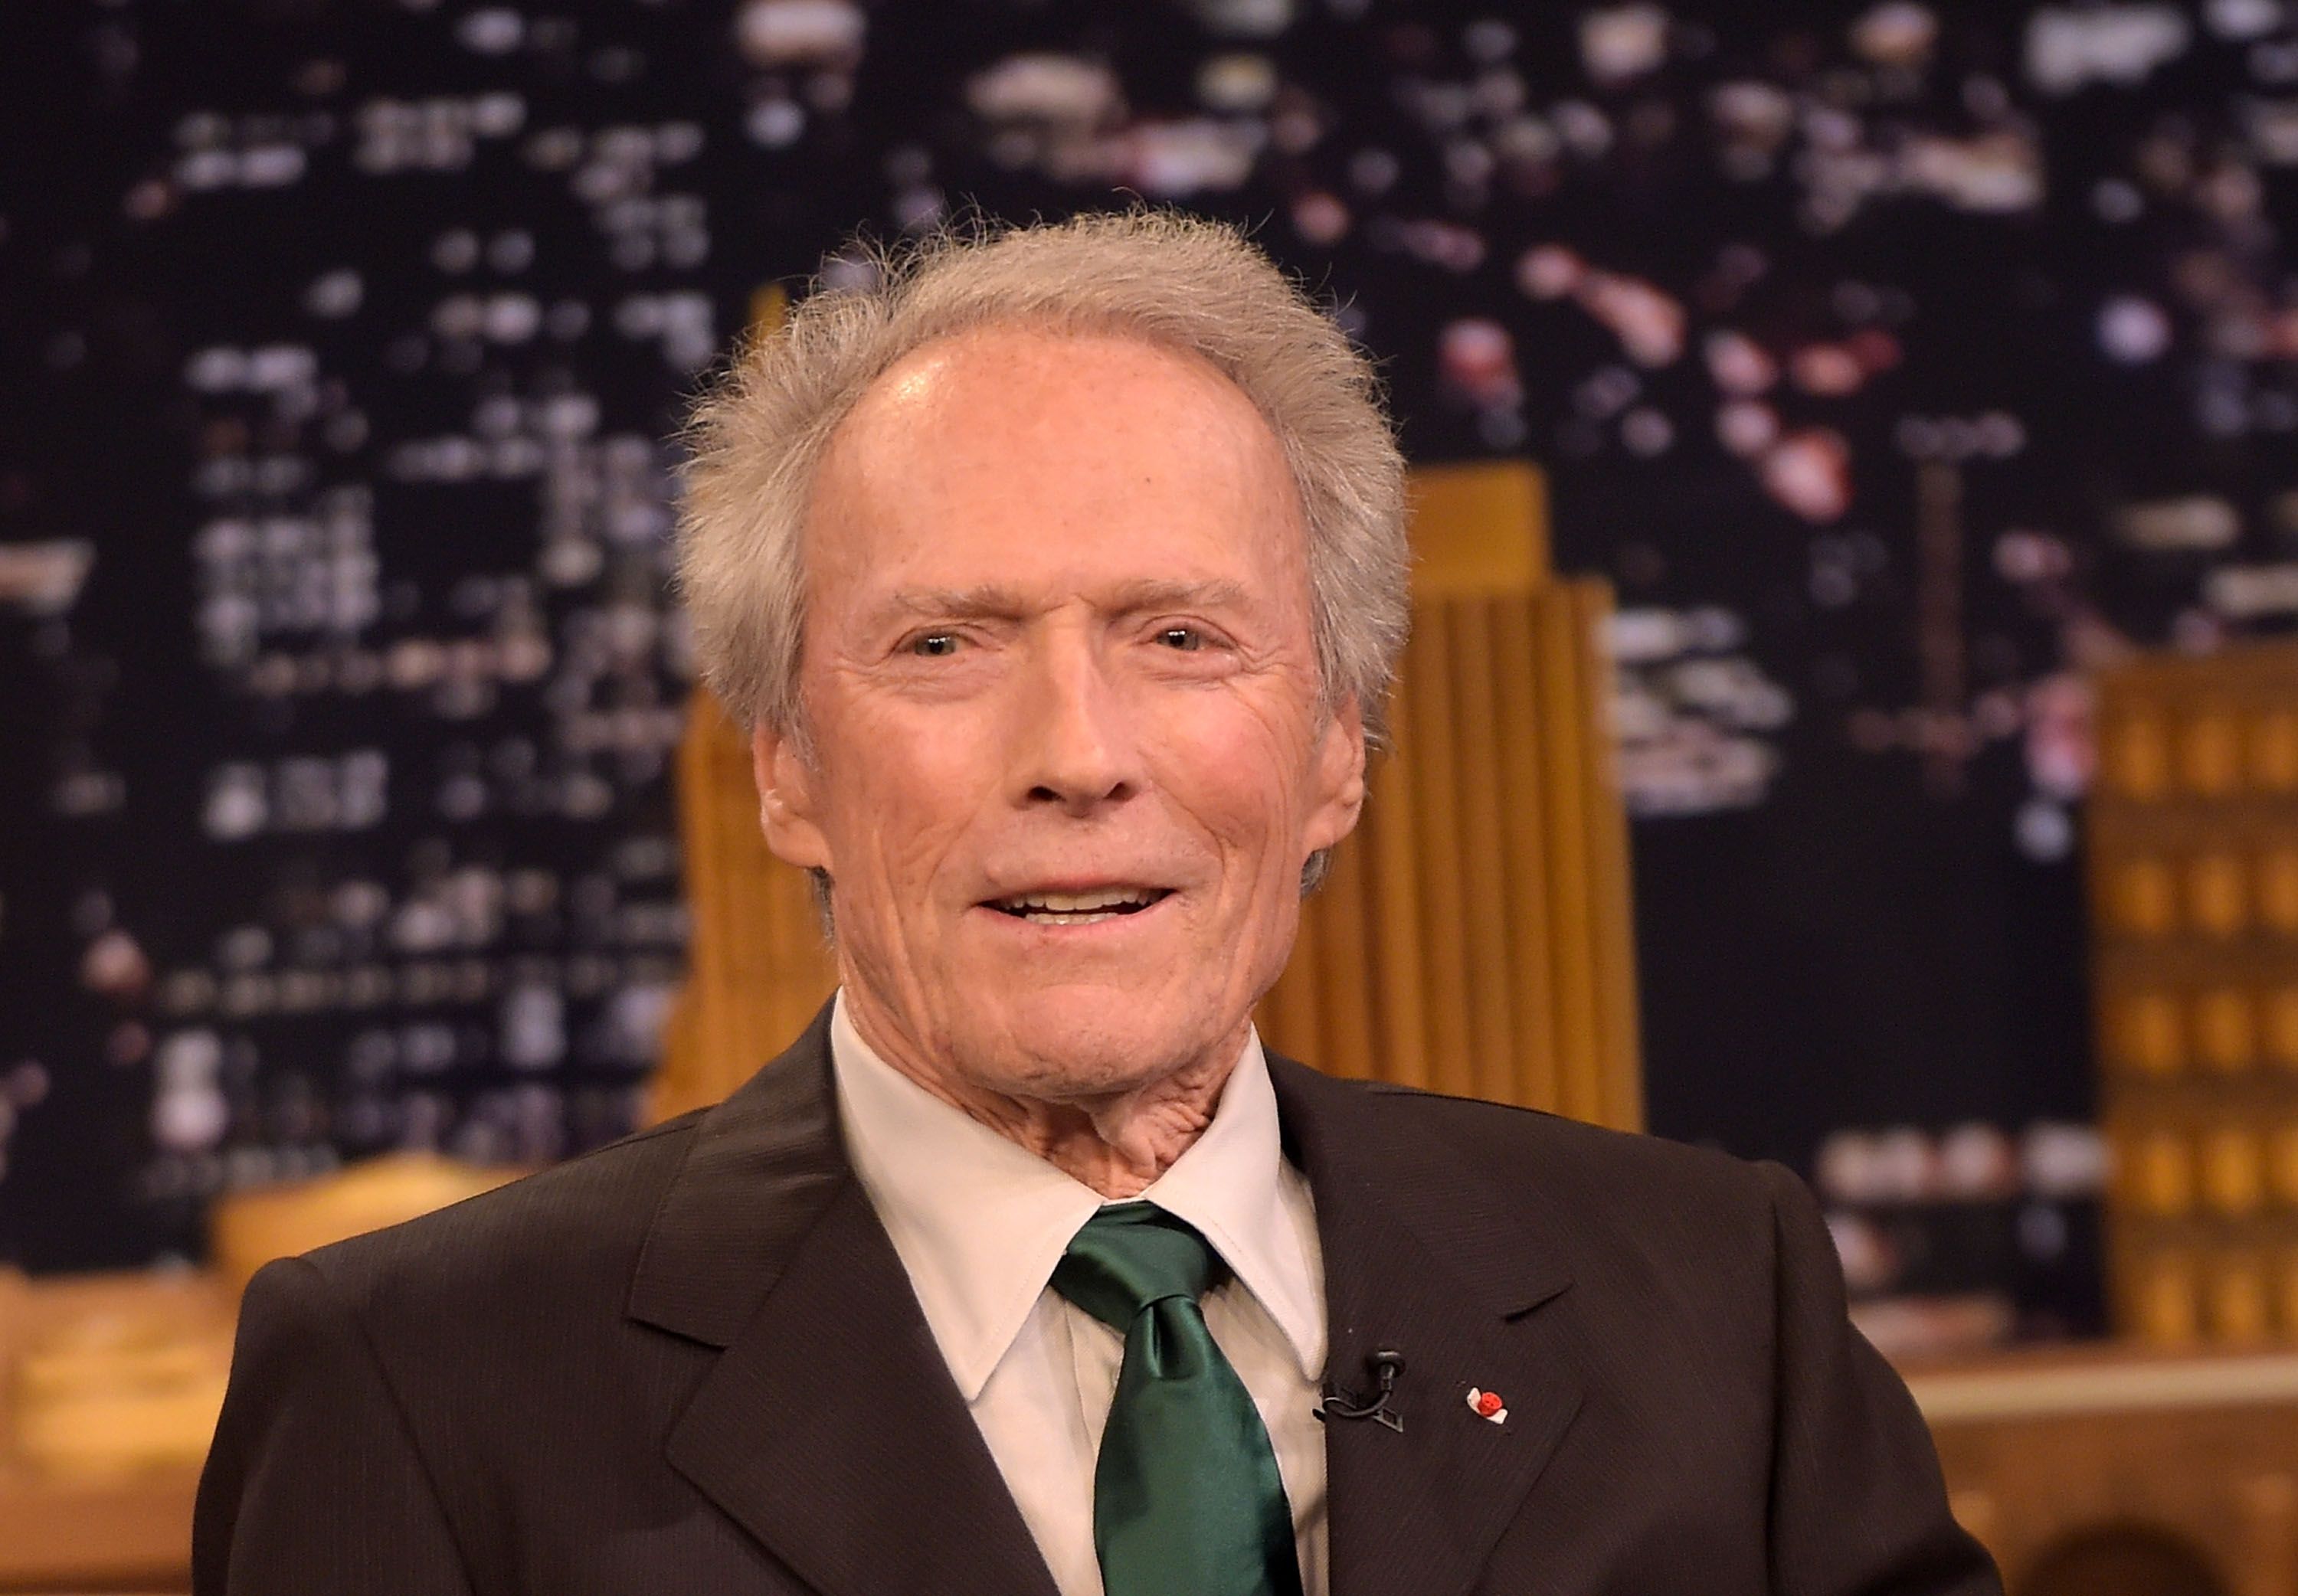 Clint Eastwood on the set of "The Tonight Show Starring Jimmy Fallon" at Rockefeller Center on September 6, 2016 in New York City. | Source: Getty Images